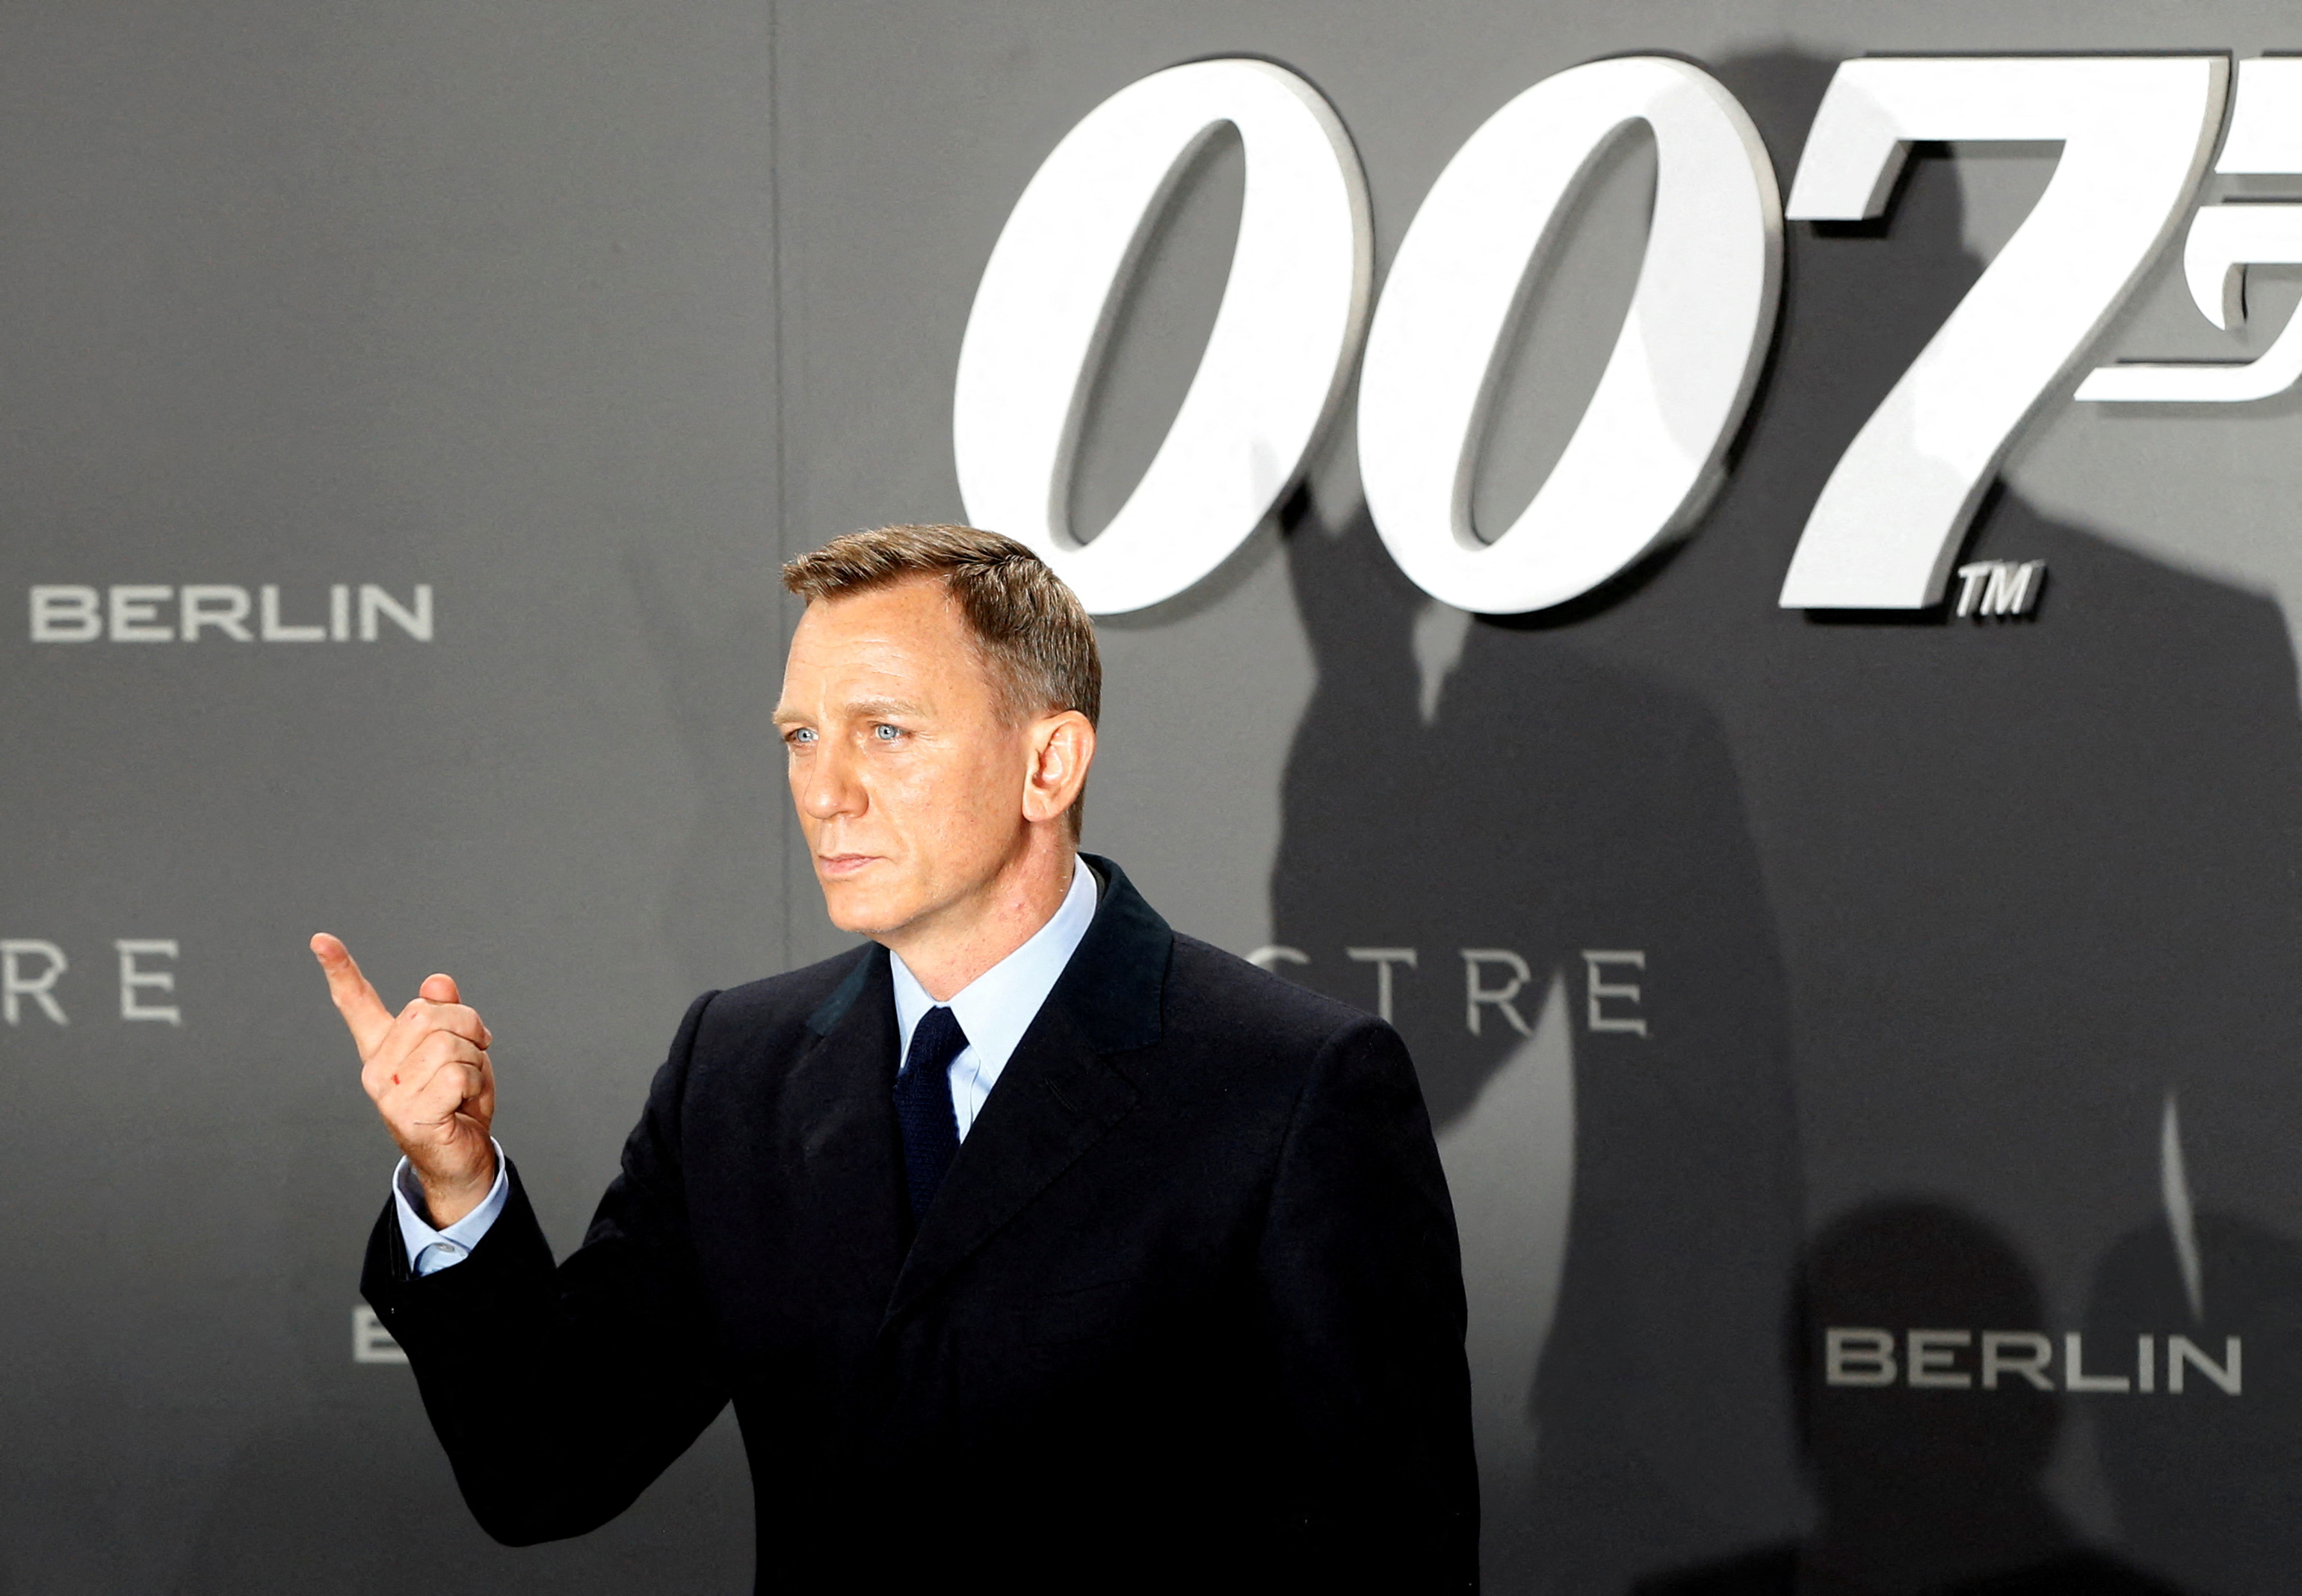 Actor Daniel Craig poses on the red carpet at the German premiere of the James Bond 007 film 